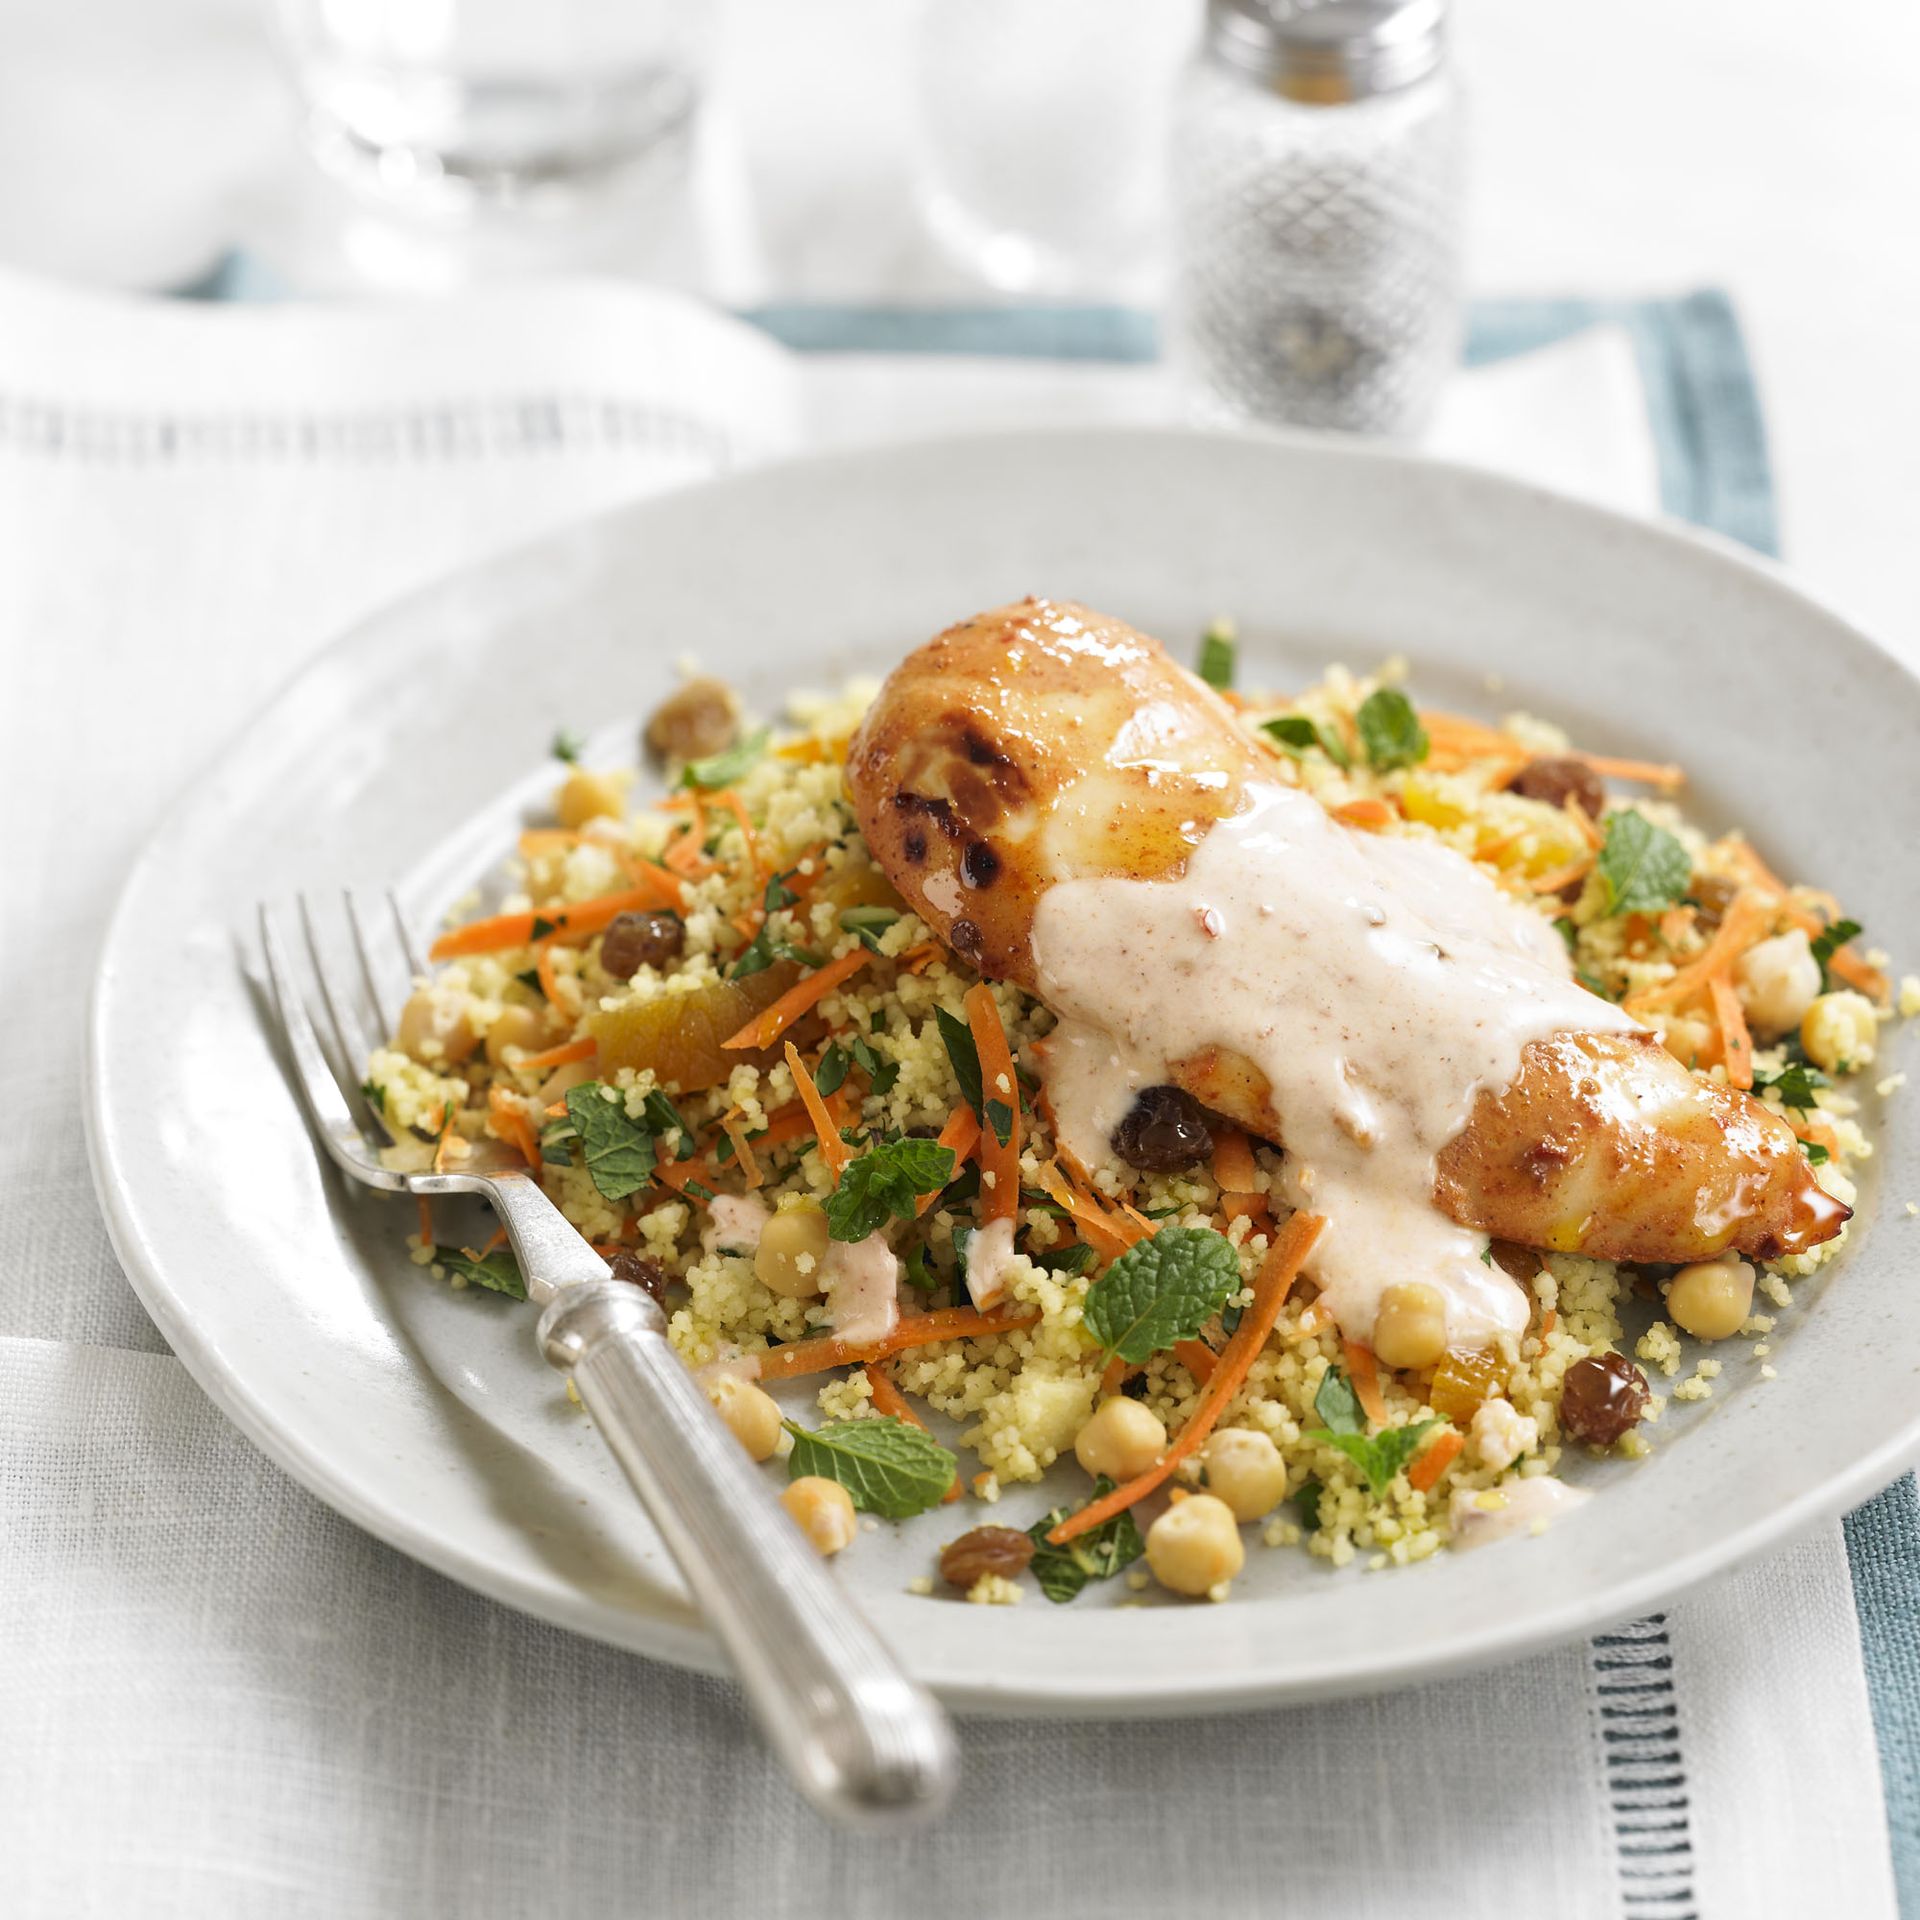 Spiced Chicken with Fruity Couscous and Yogurt Dressing | Dinner ...